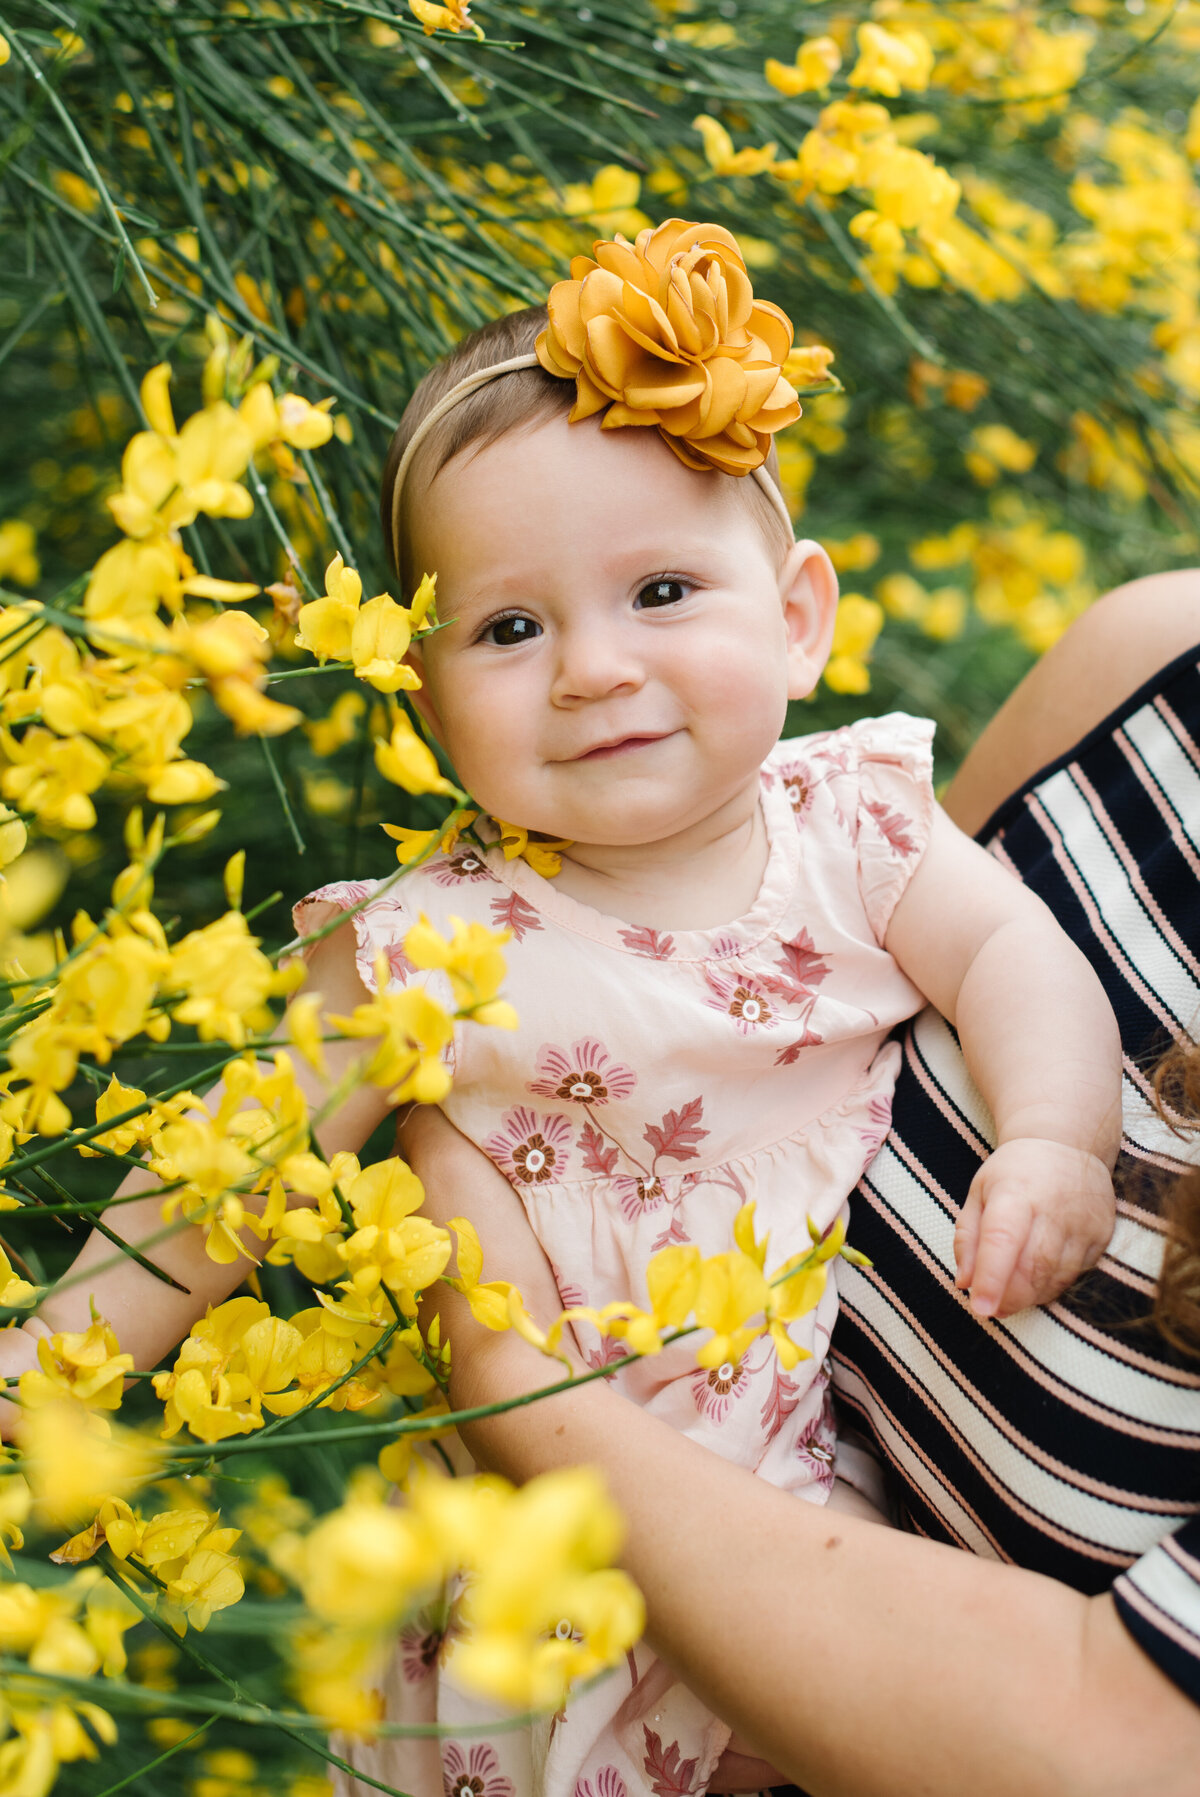 Baby girl with yellow flowers